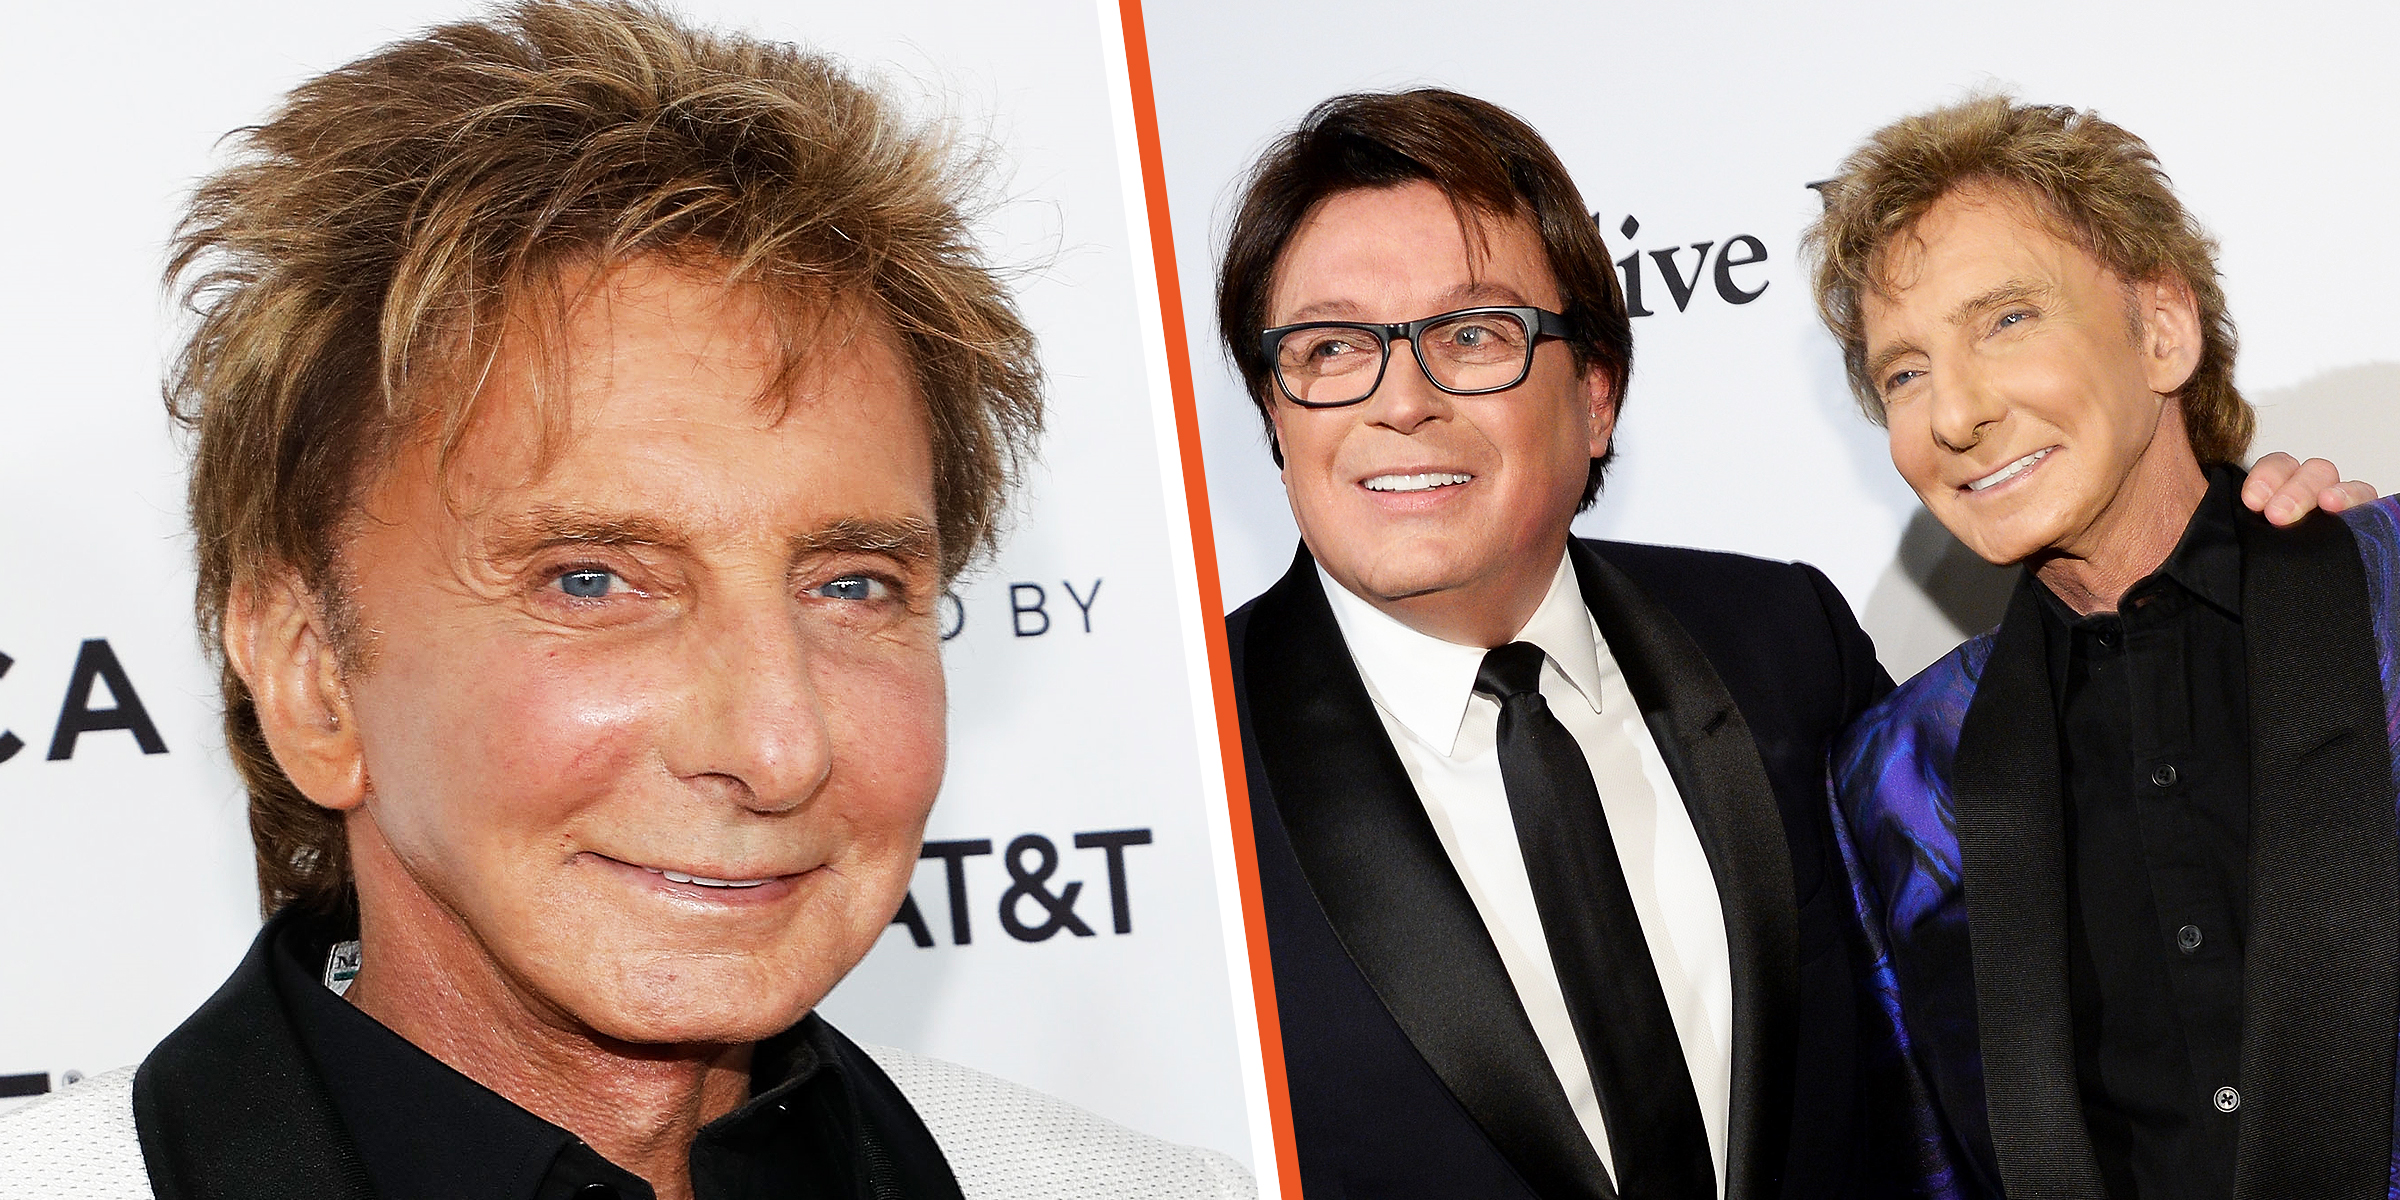 Barry Manilow | Garry Kief et Barry Manilow | Source : Getty Images